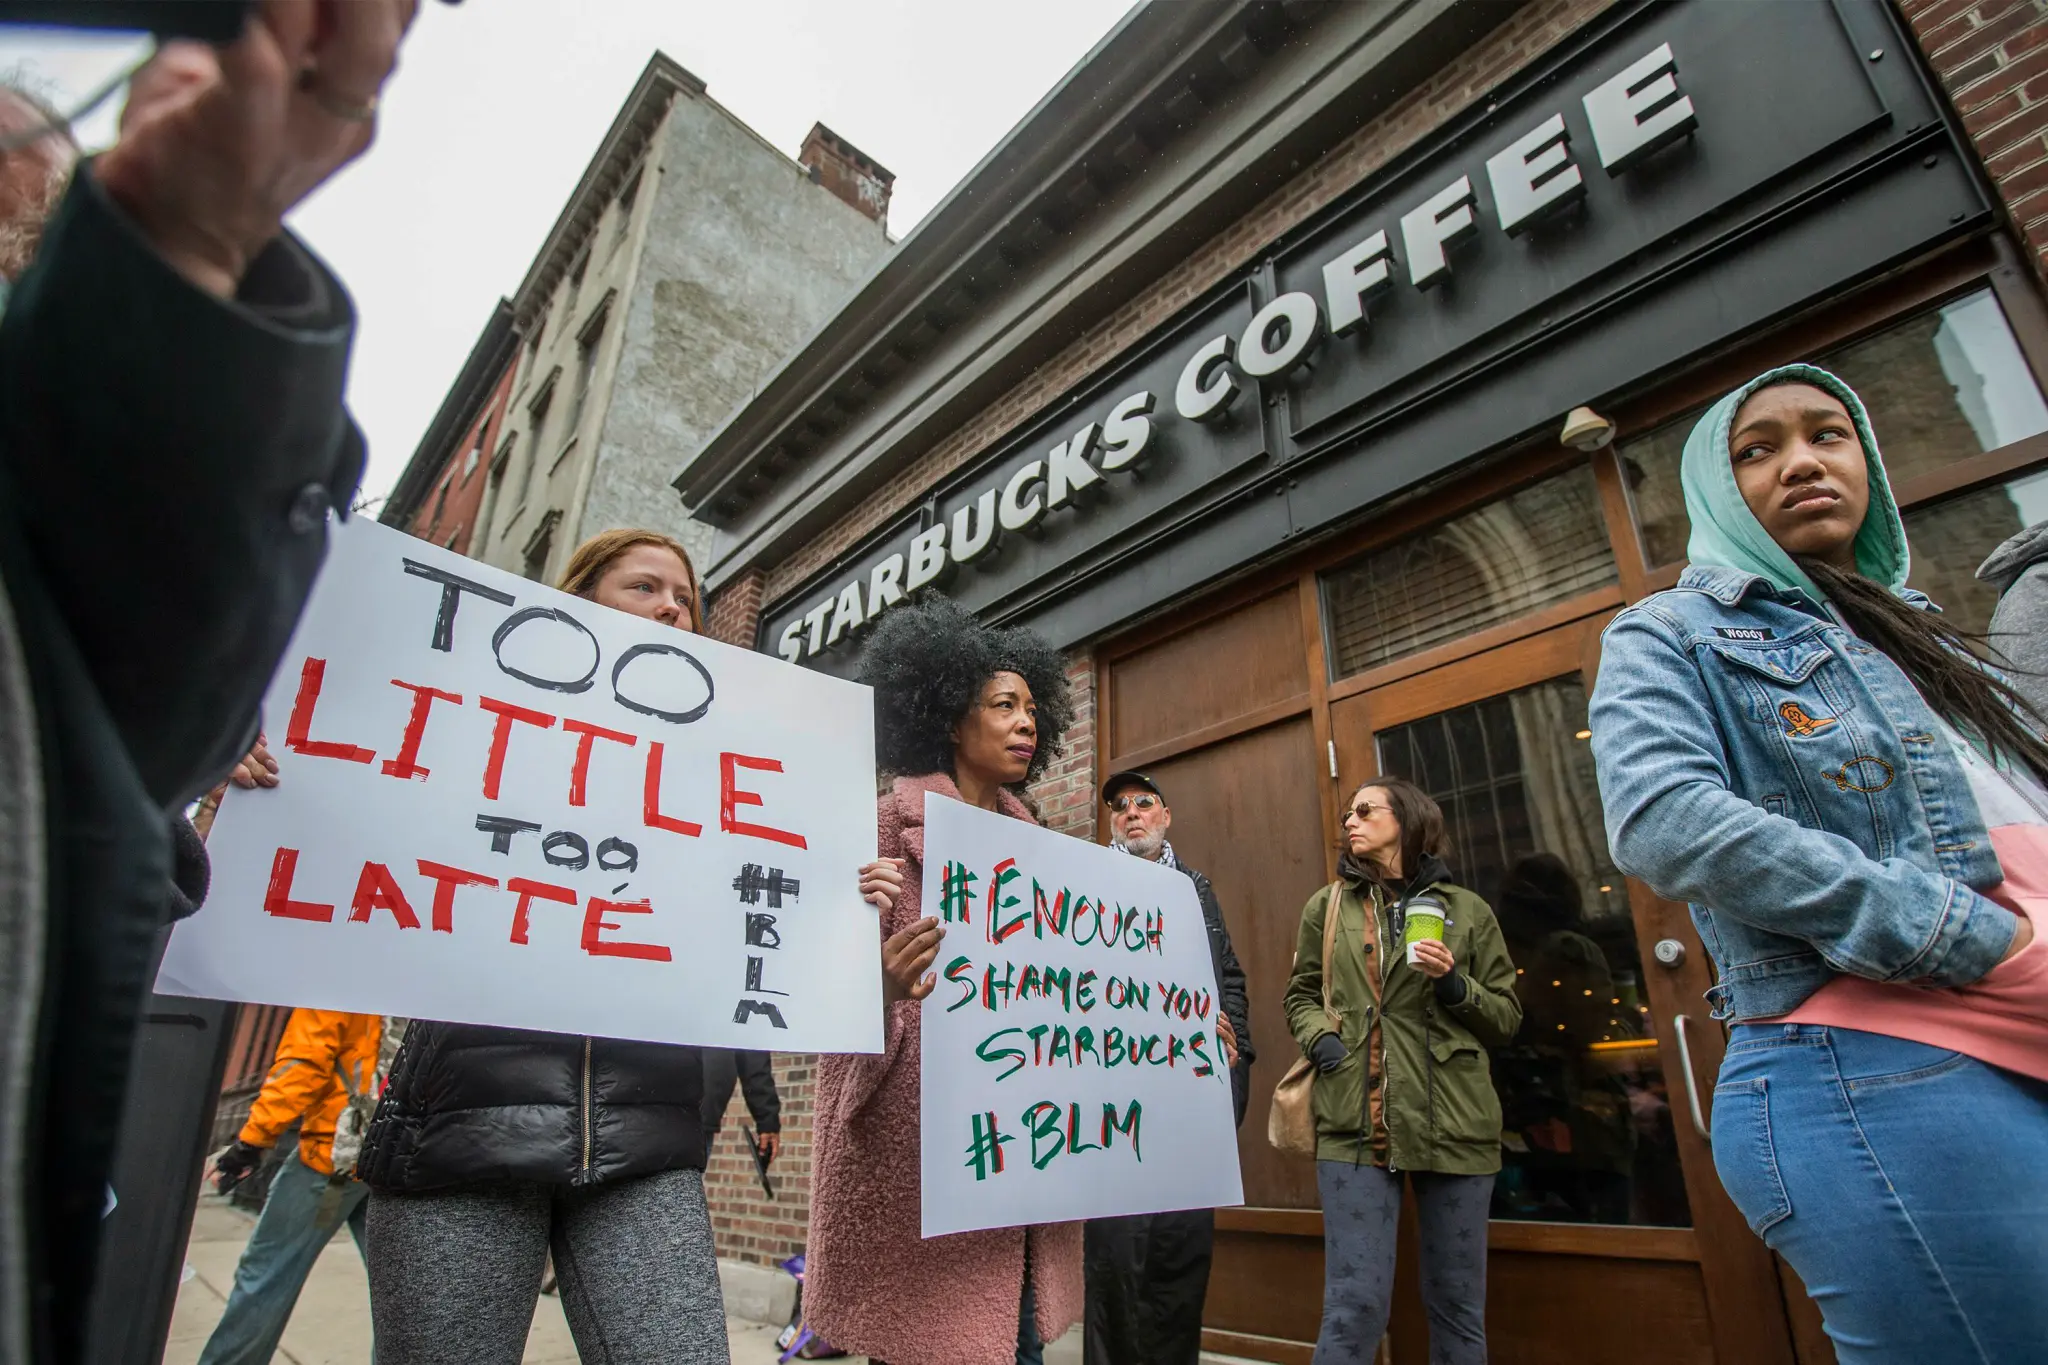 White Starbucks manager wins $25M suit claiming she was fired over her race after arrest of black men